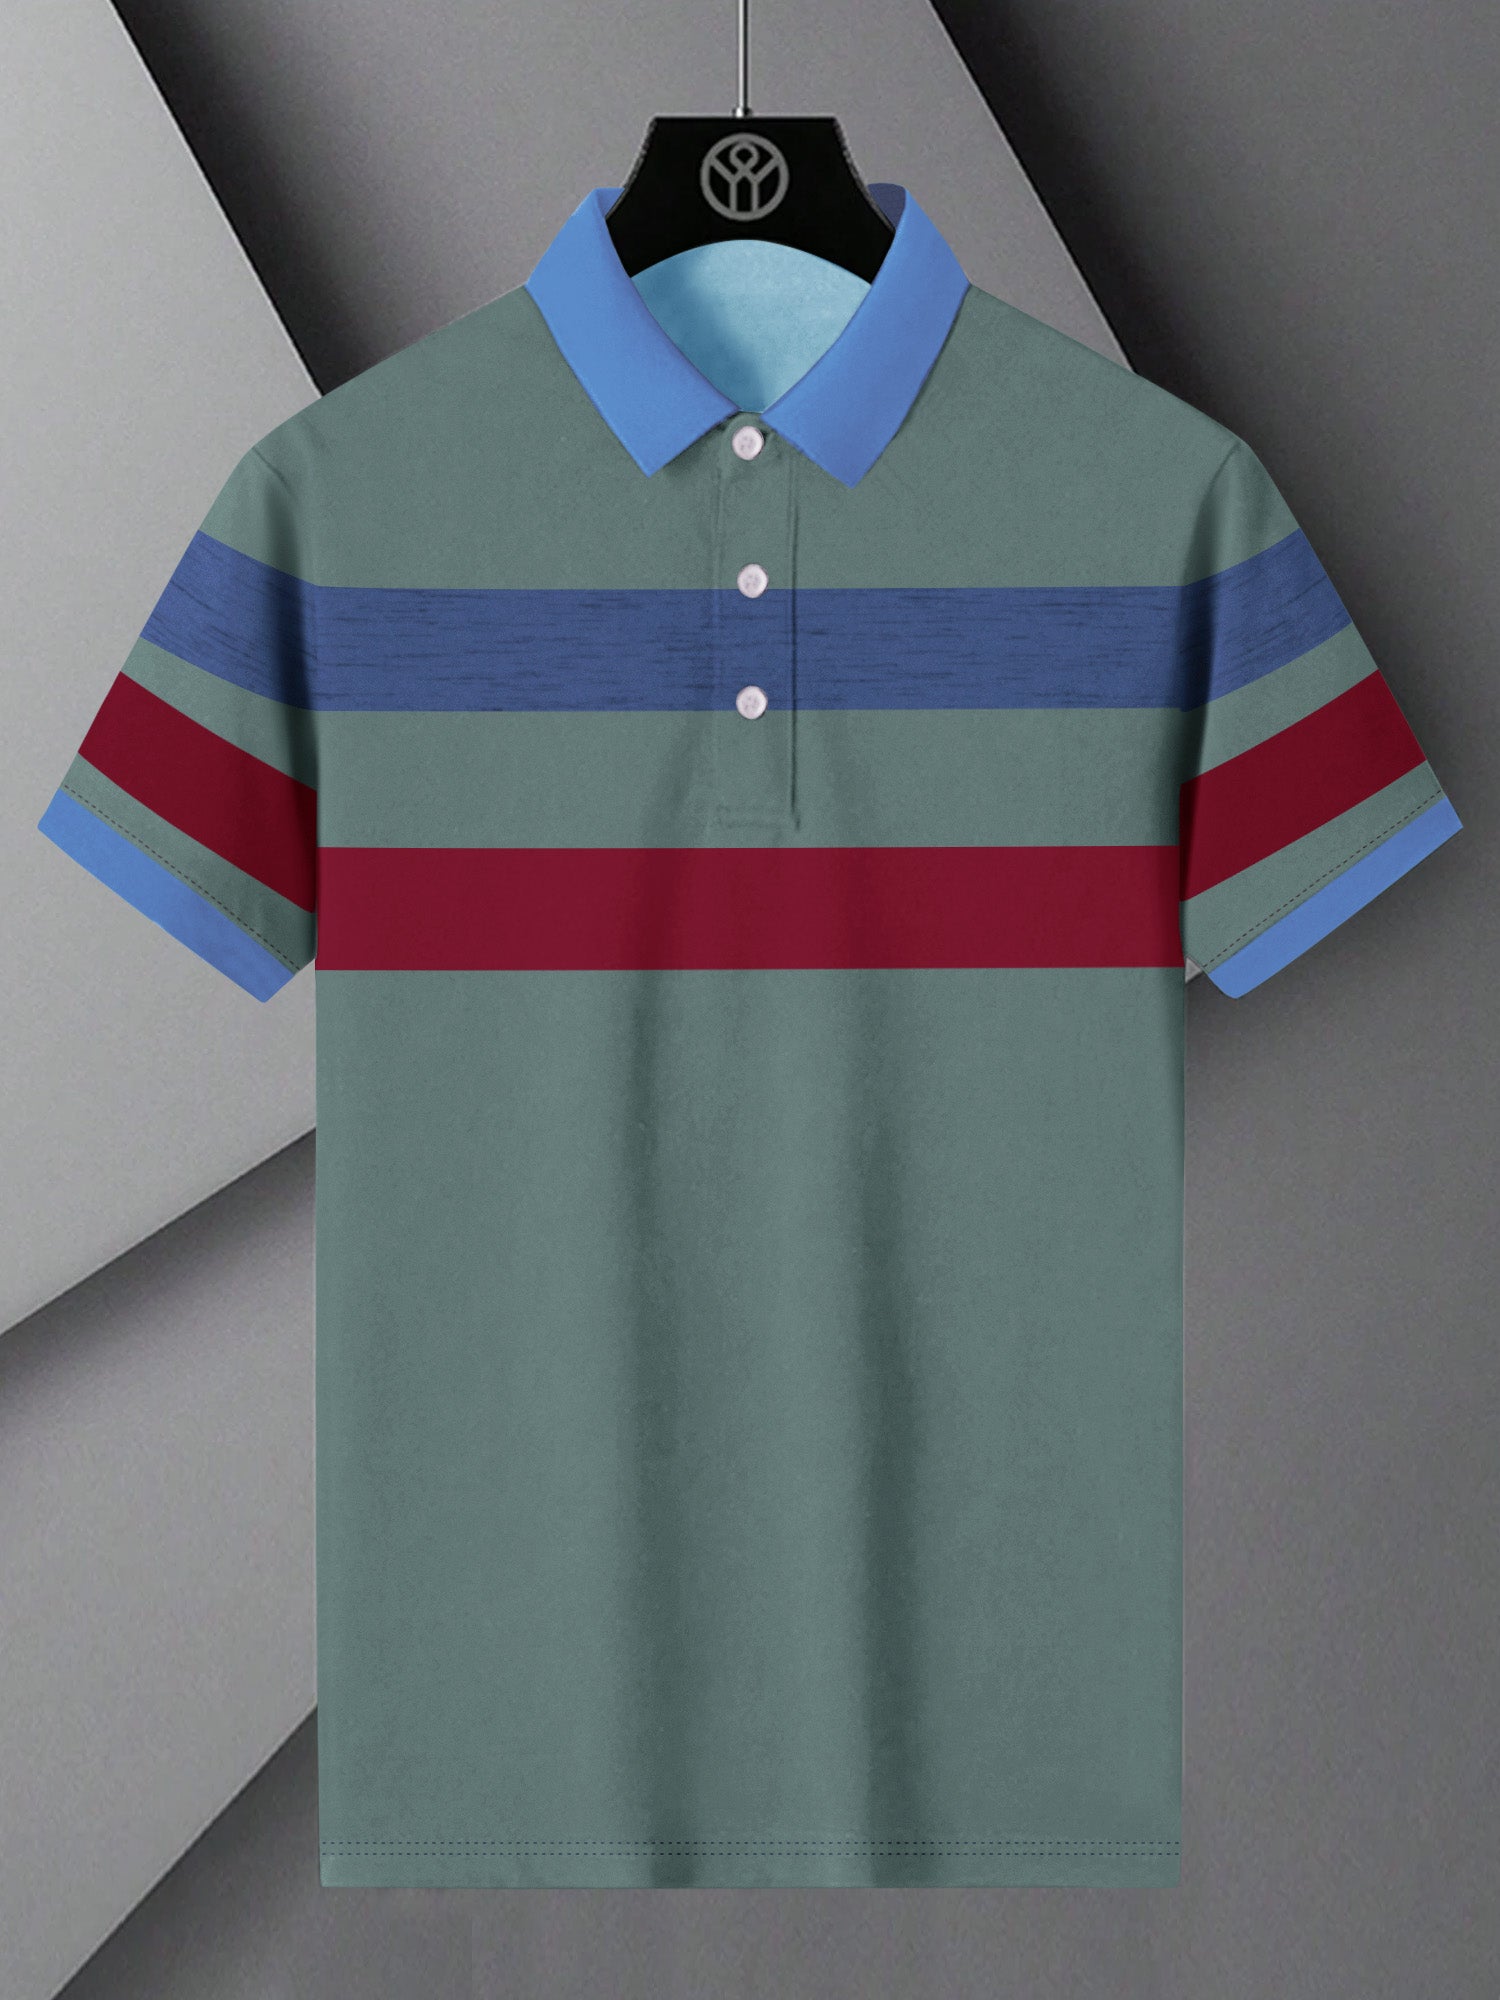 NXT Summer Polo Shirt For Men-Cyan Green with Blue & Red Stripe-BE739/BR12989